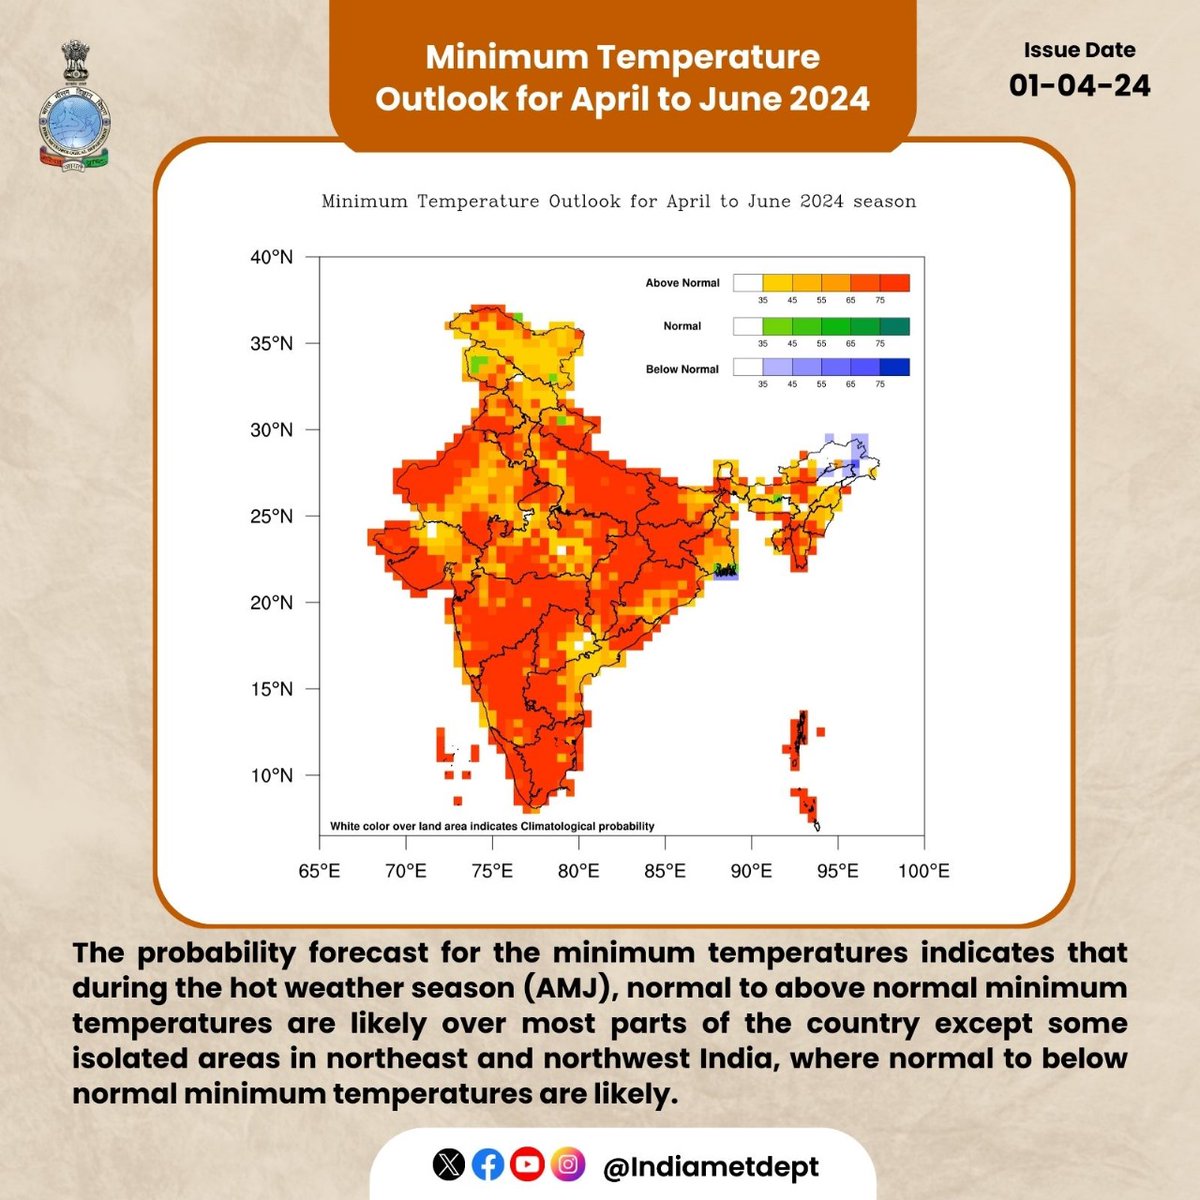 • During the season (AMJ), normal to above normal minimum temperatures are likely over most parts of the country except of some isolated areas in northeast and northwest India, where normal to below normal minimum temperatures are likely.